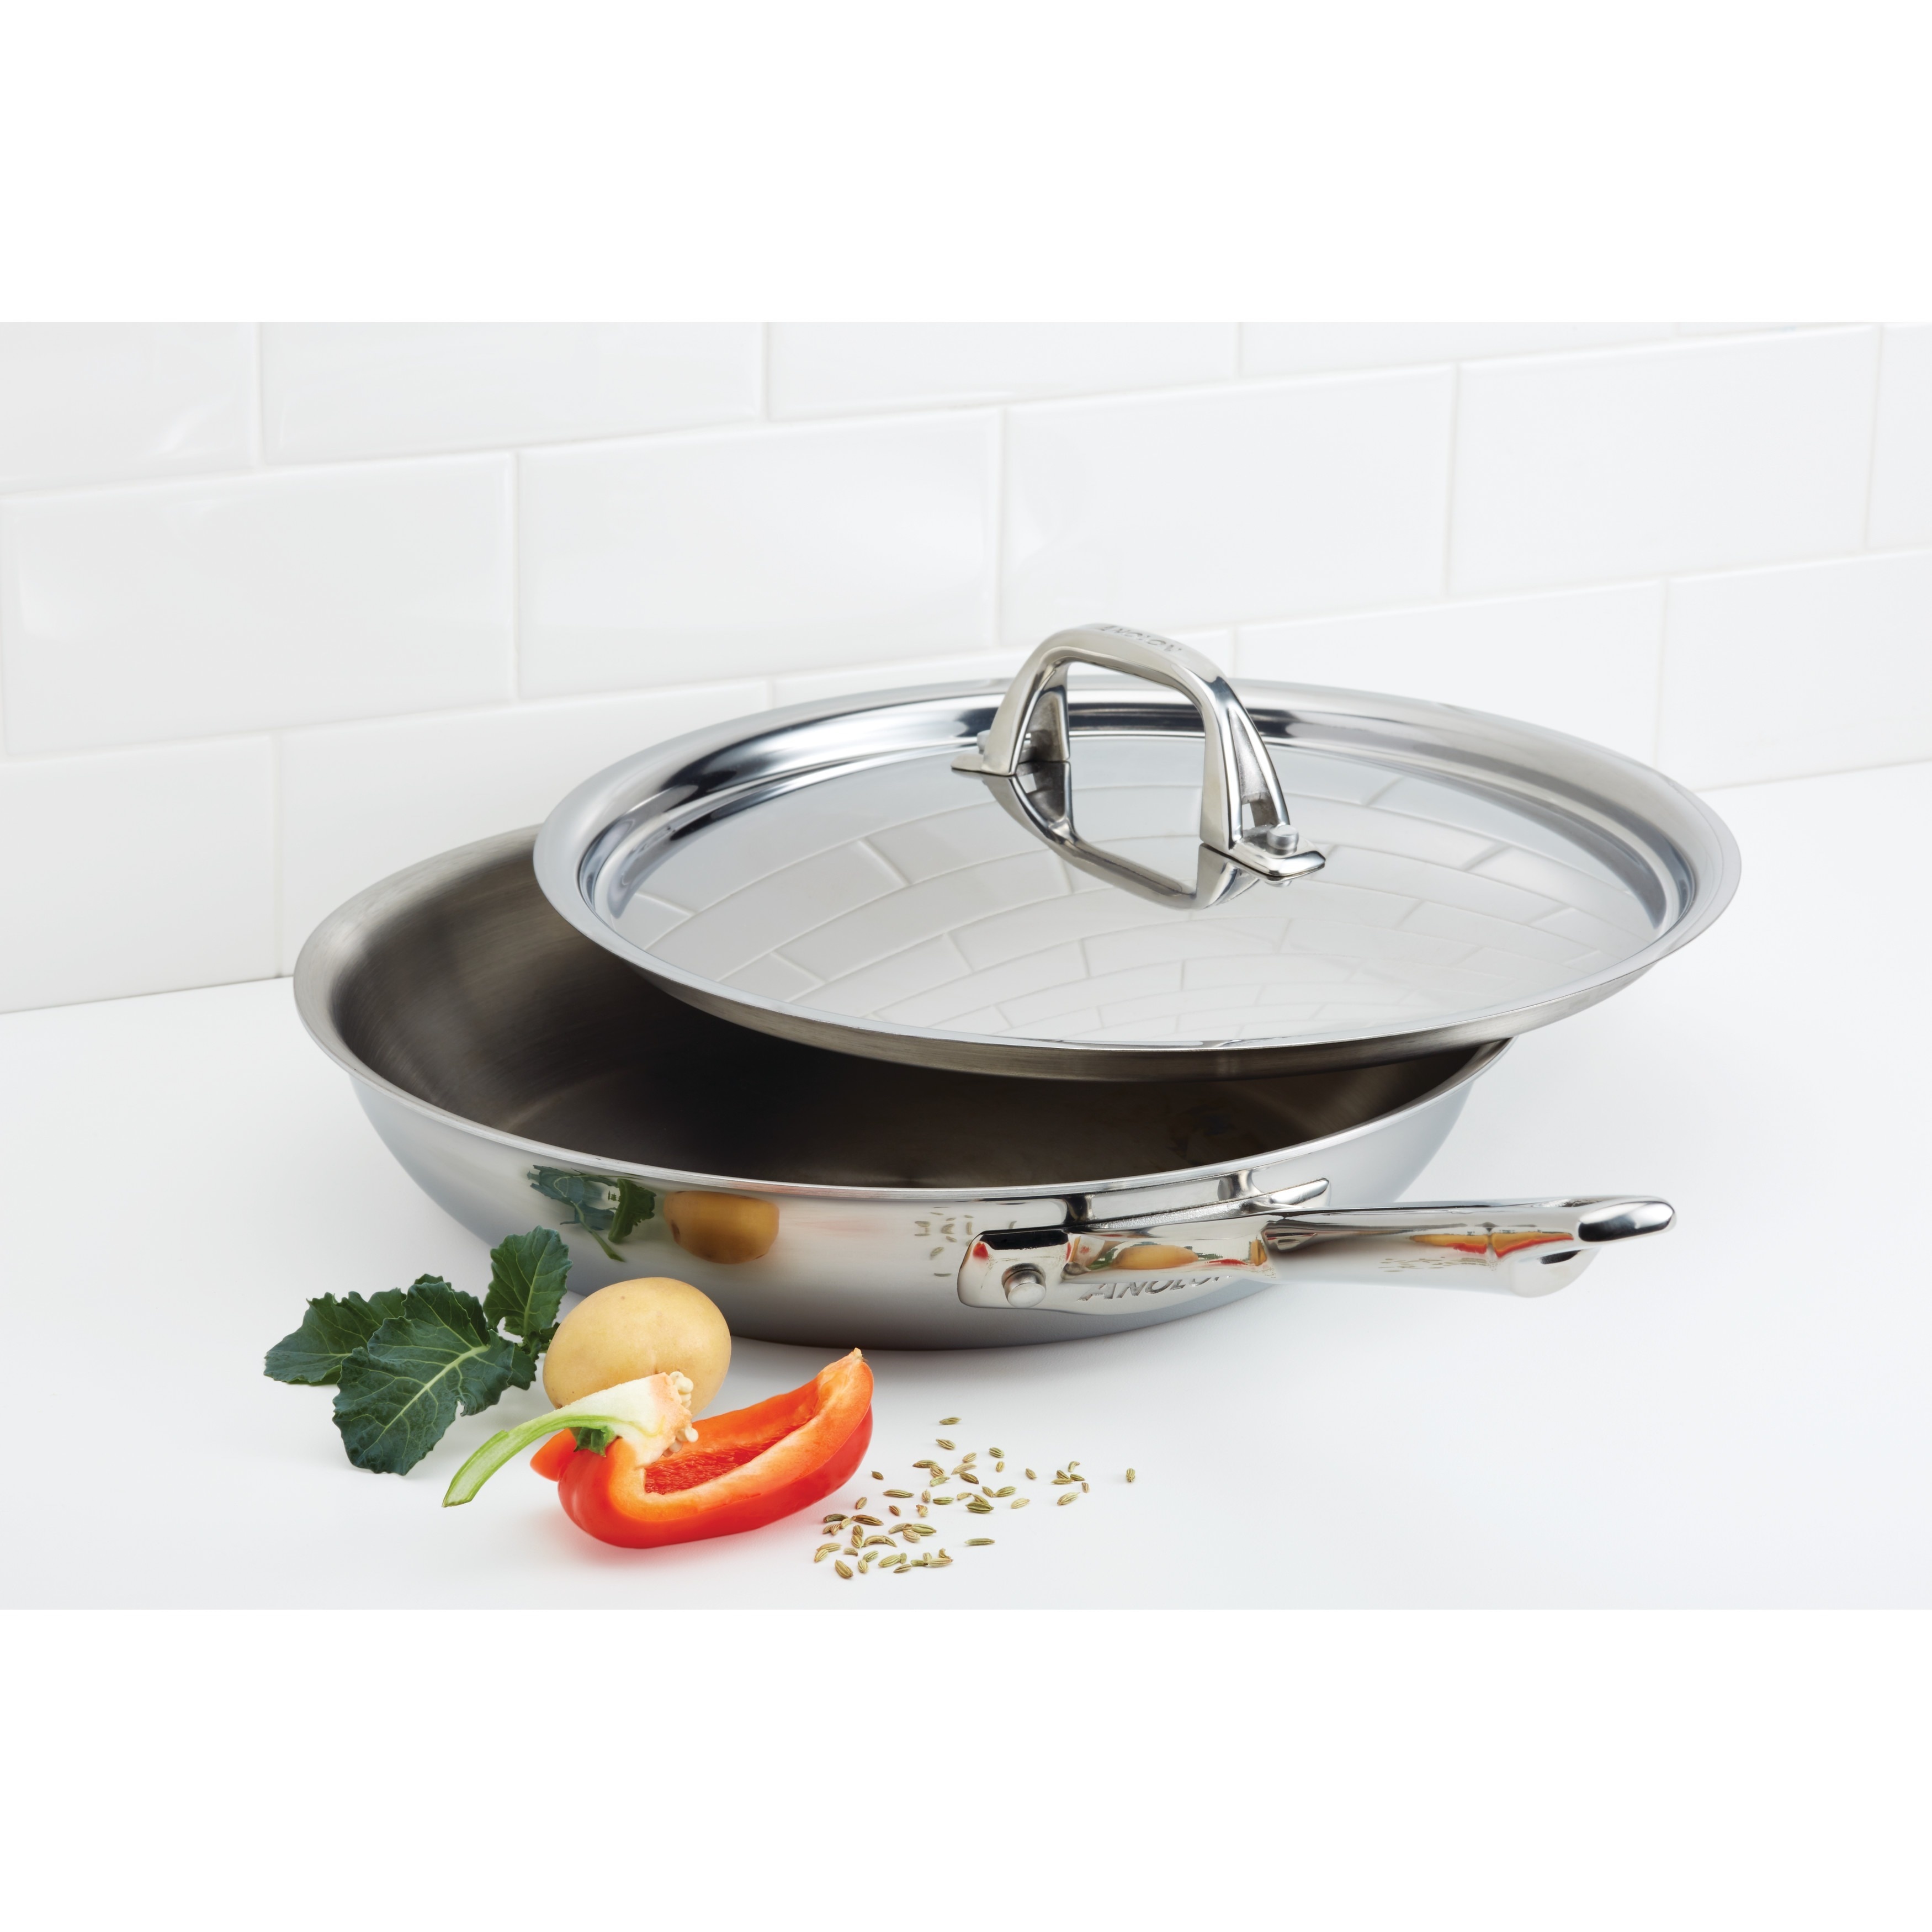 https://ak1.ostkcdn.com/images/products/9206704/Anolon-Tri-ply-Clad-Stainless-Steel-12-3-4-inch-Covered-Skillet-a74bfc5c-0aea-46e5-87e9-4bb2418d1b8a.jpg